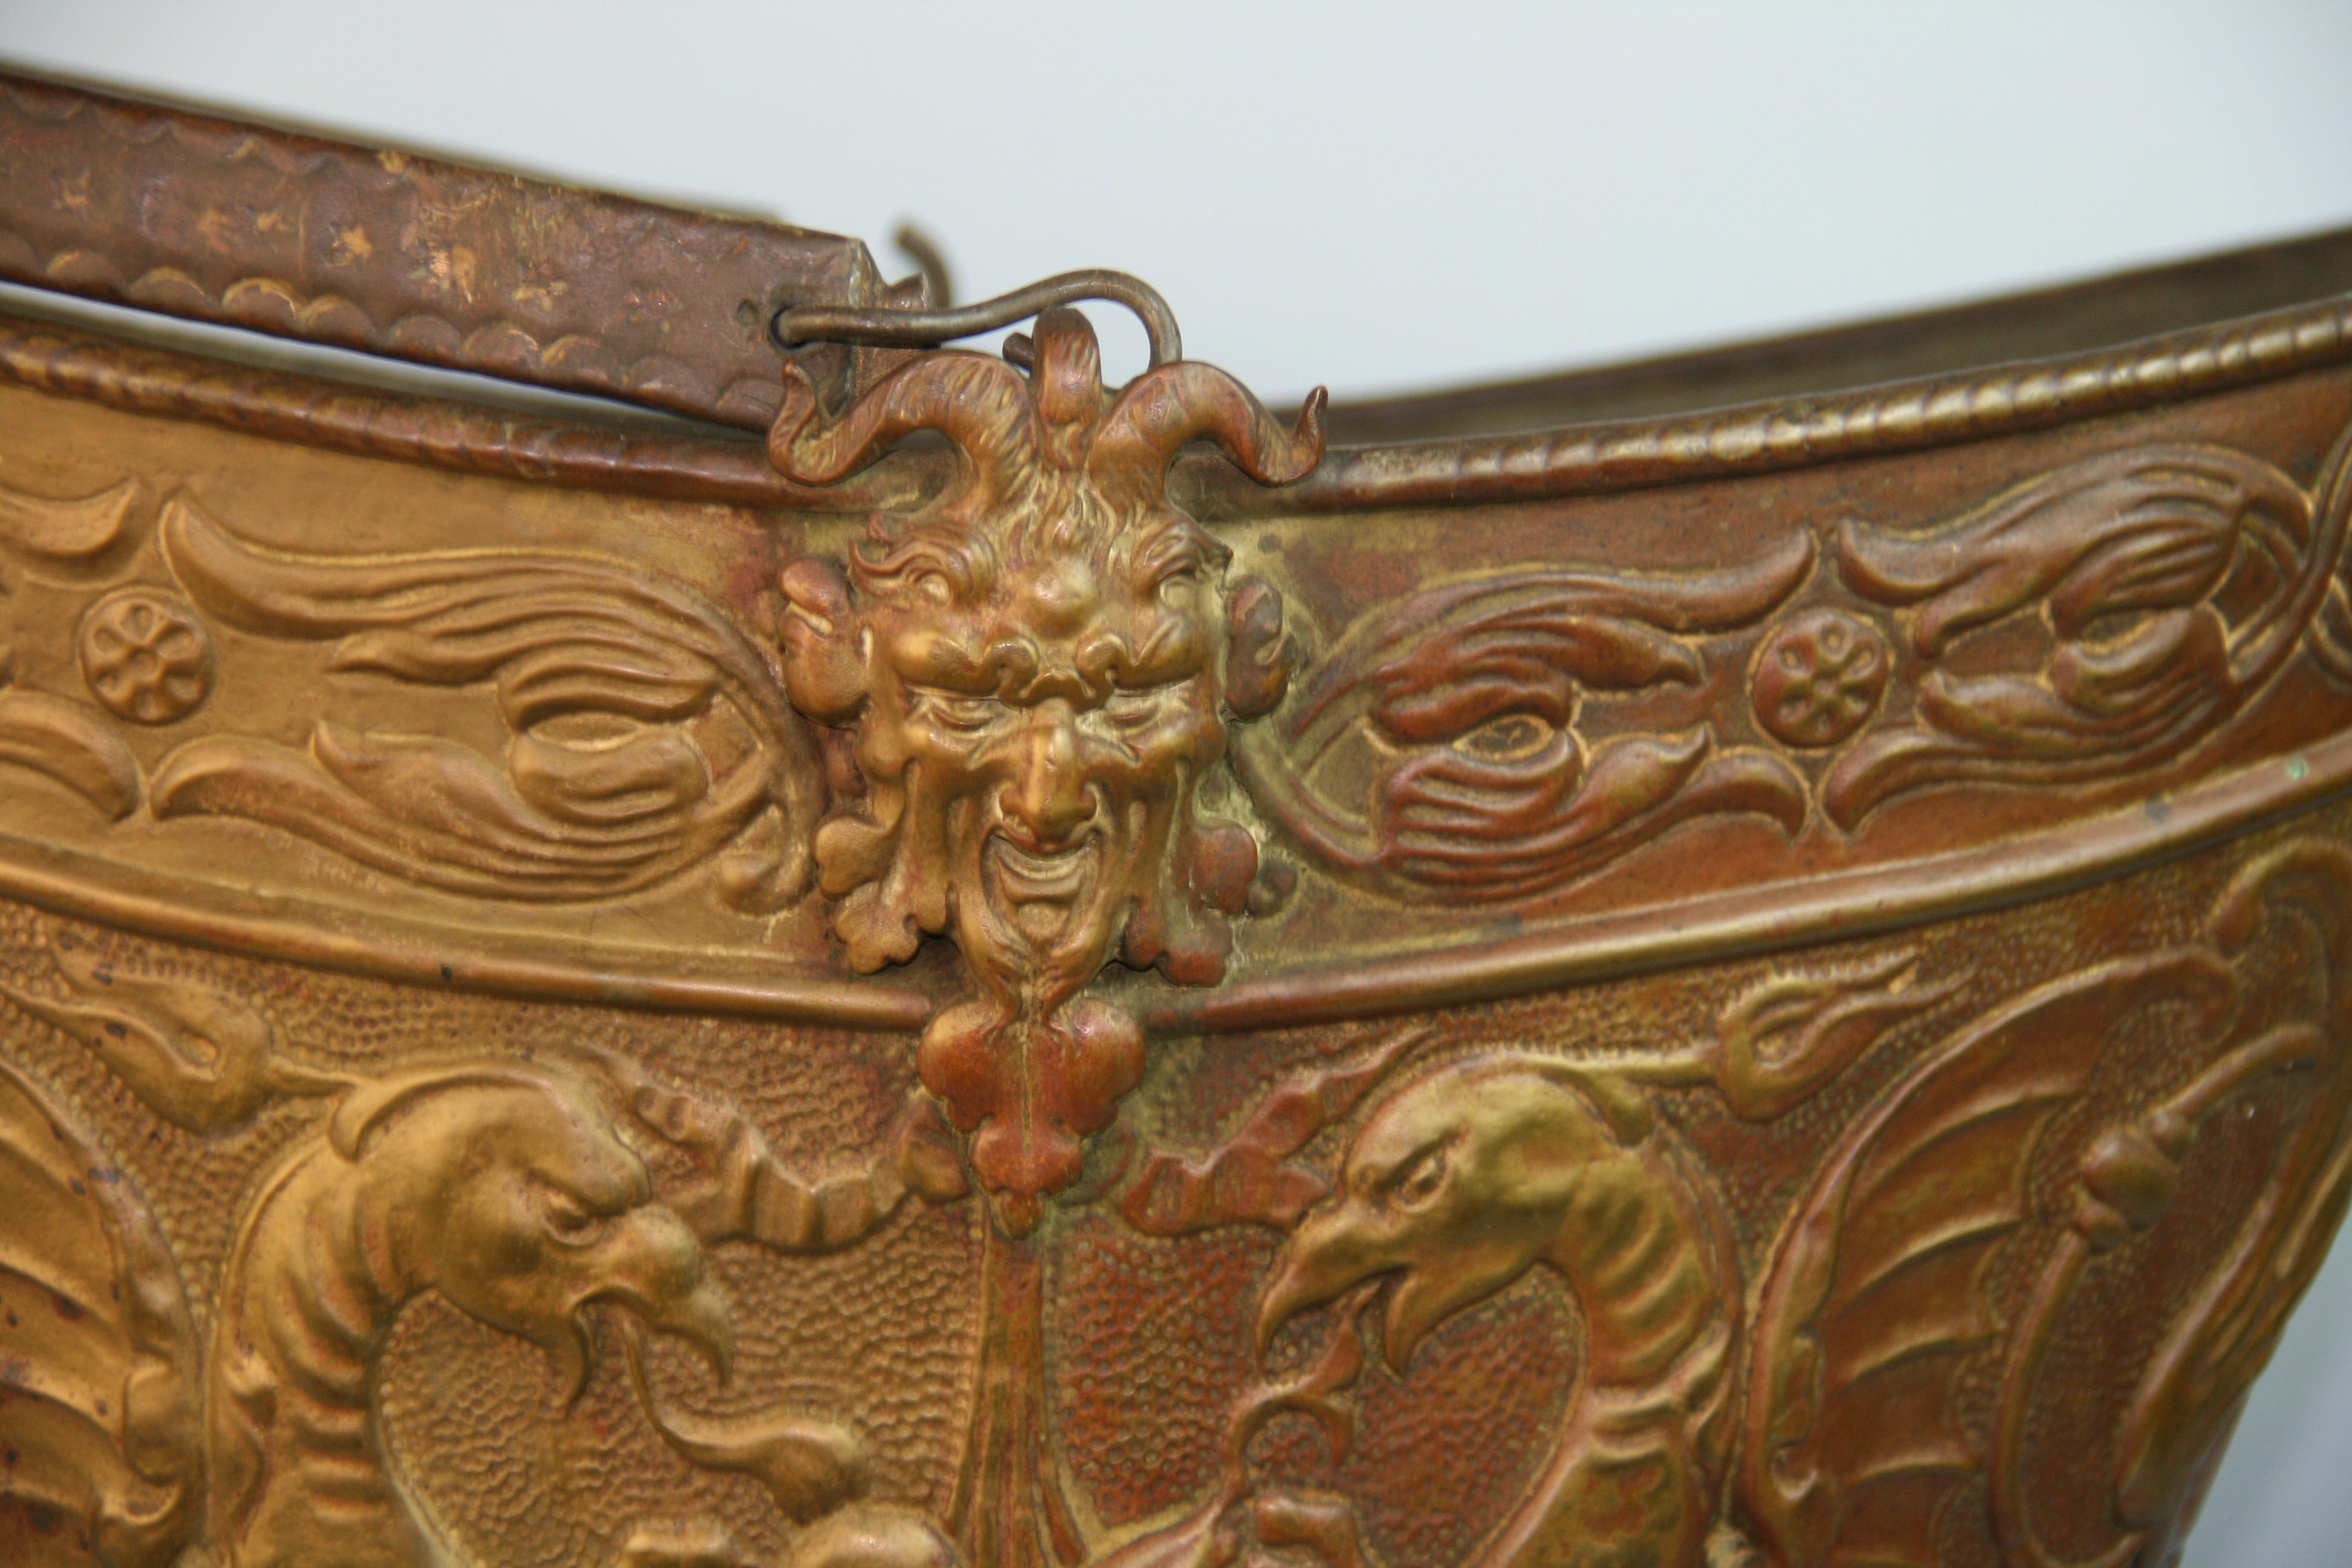 Victorian Embossed Coal/Wood Bucket Brass/Metal Late 19th Century For Sale 2